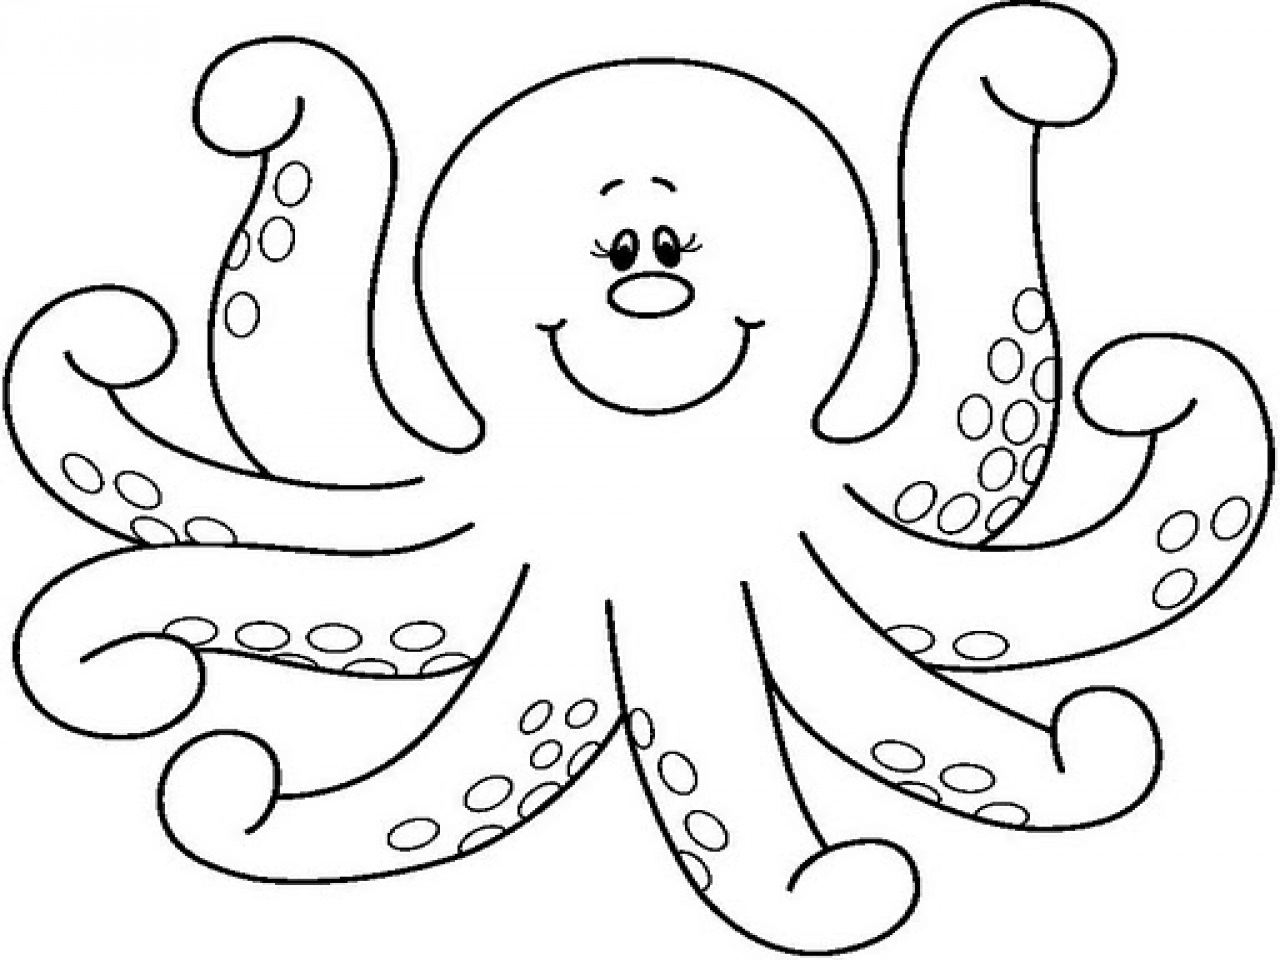 Octopus clipart easy, Octopus easy Transparent FREE for